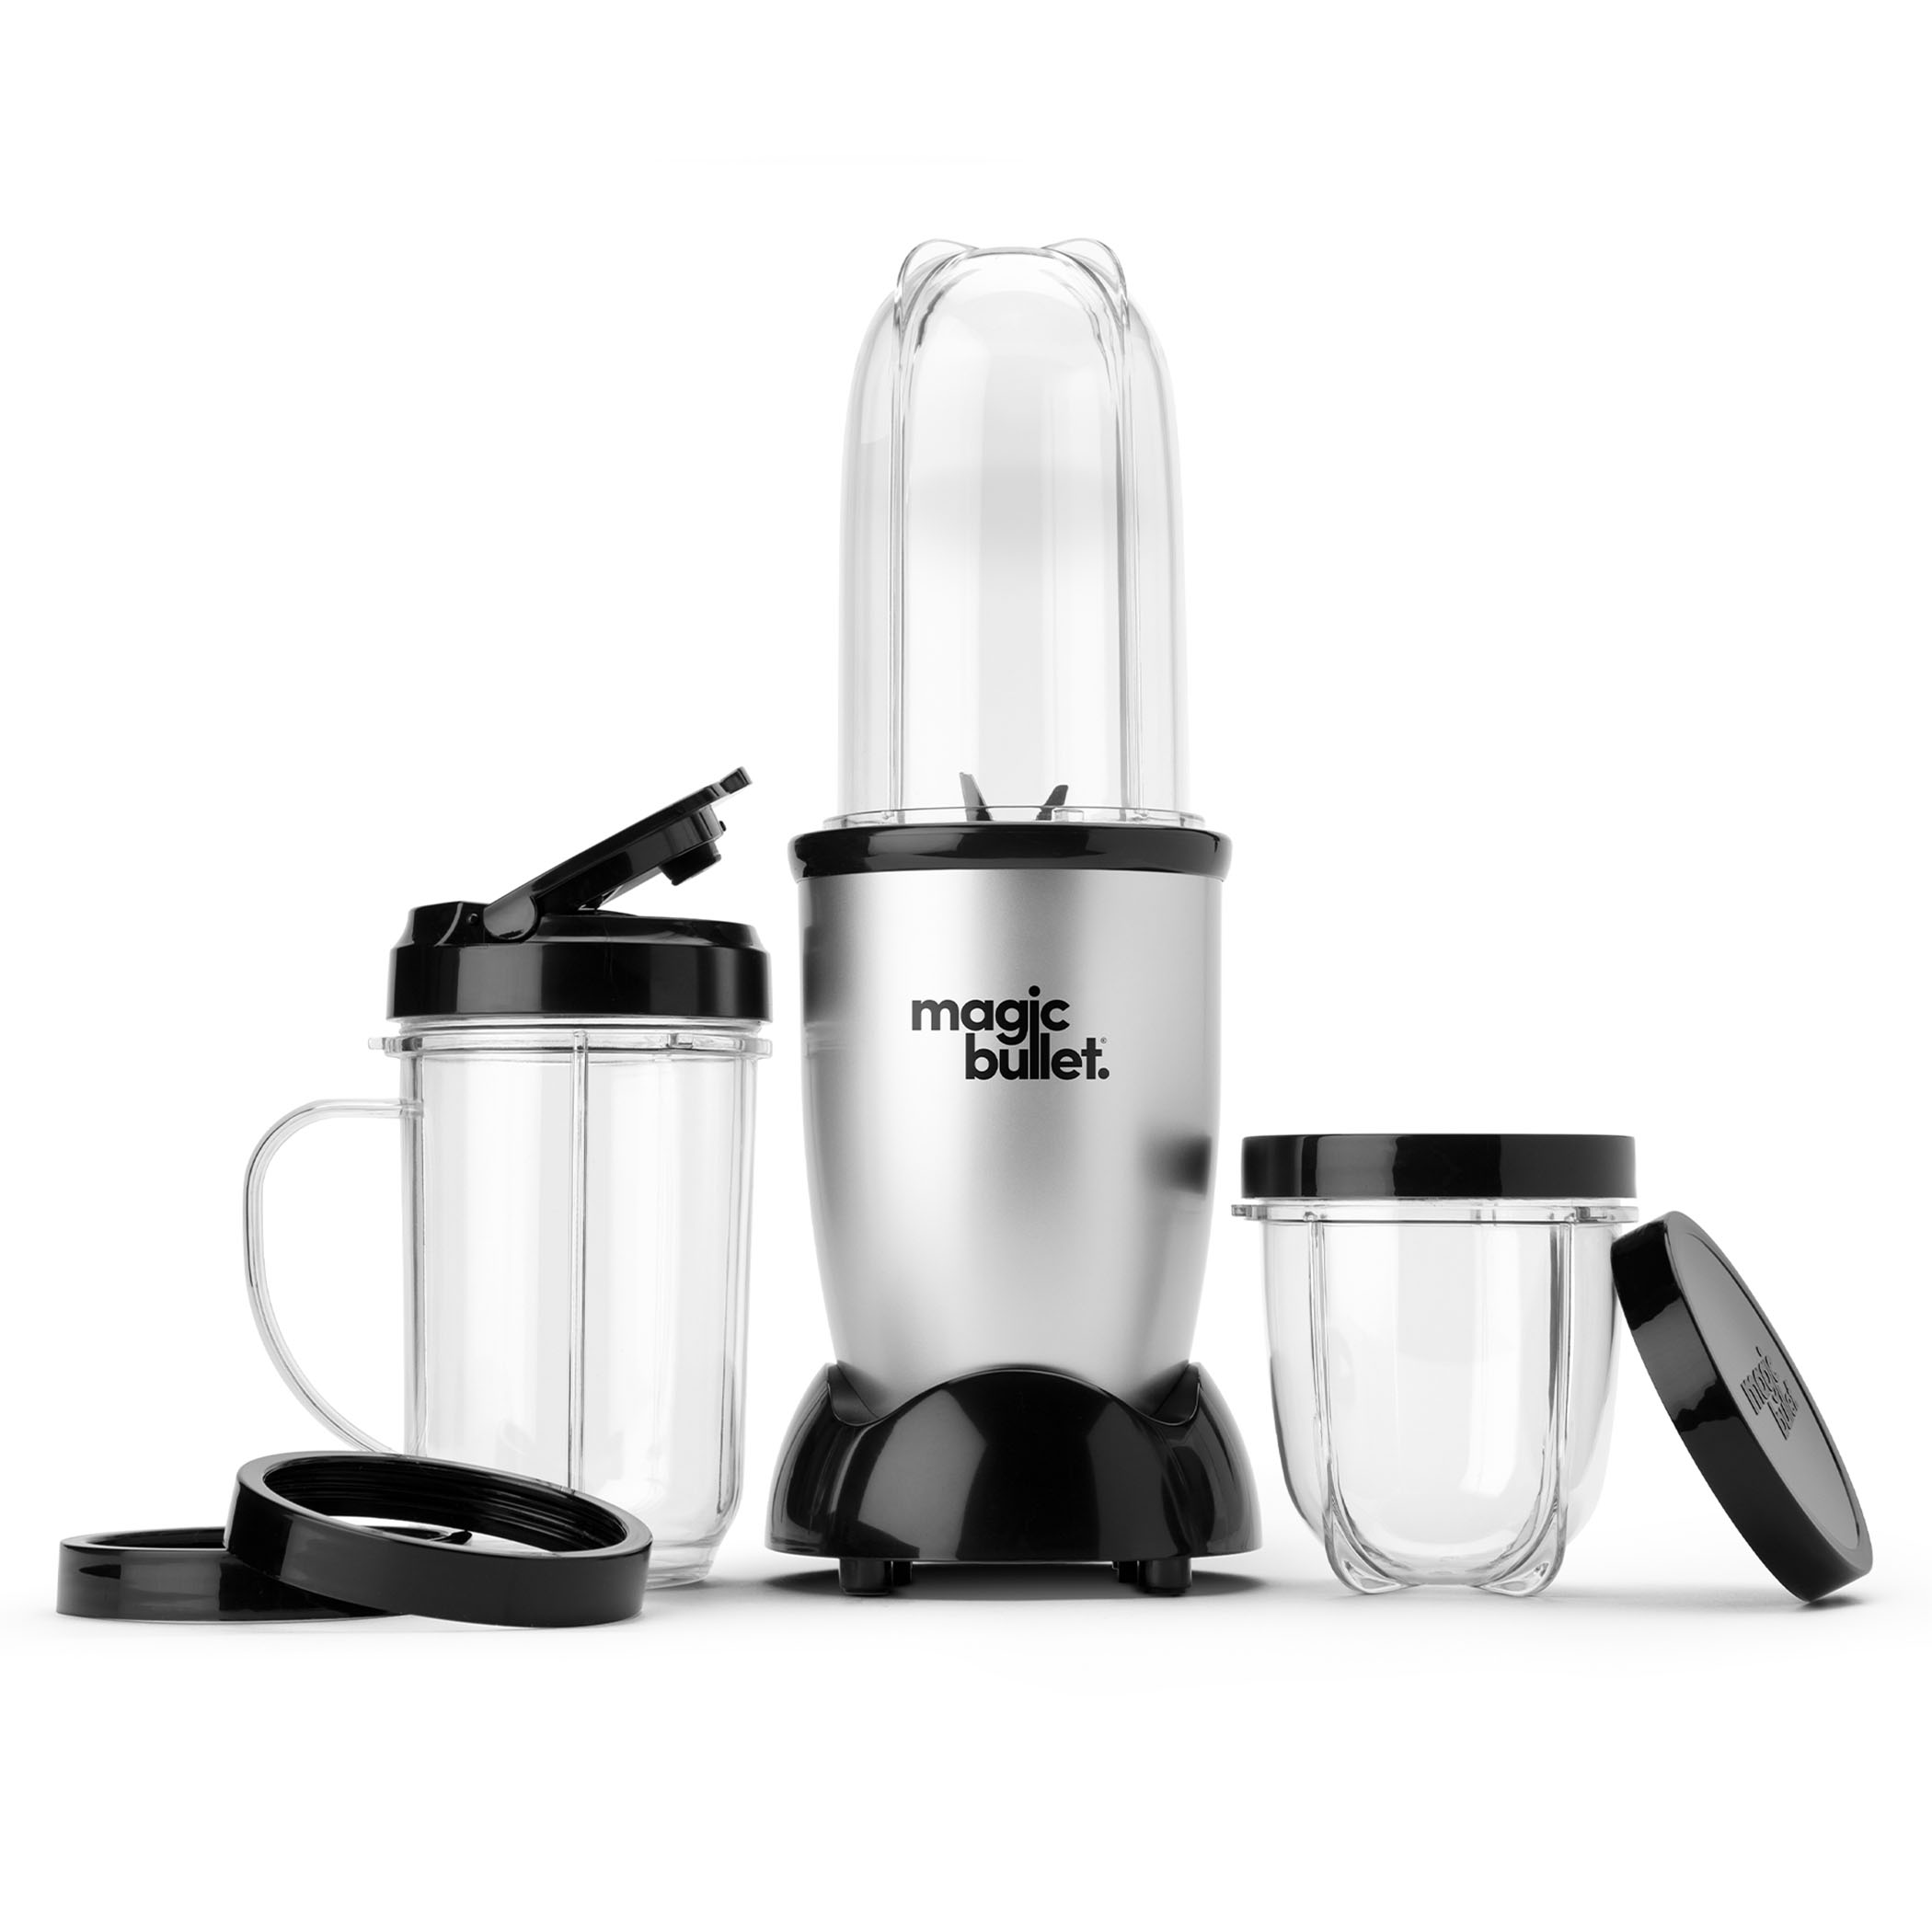 Magic Bullet® 11 Piece Personal Blender MBR-1101 – Silver / Black - image 1 of 11